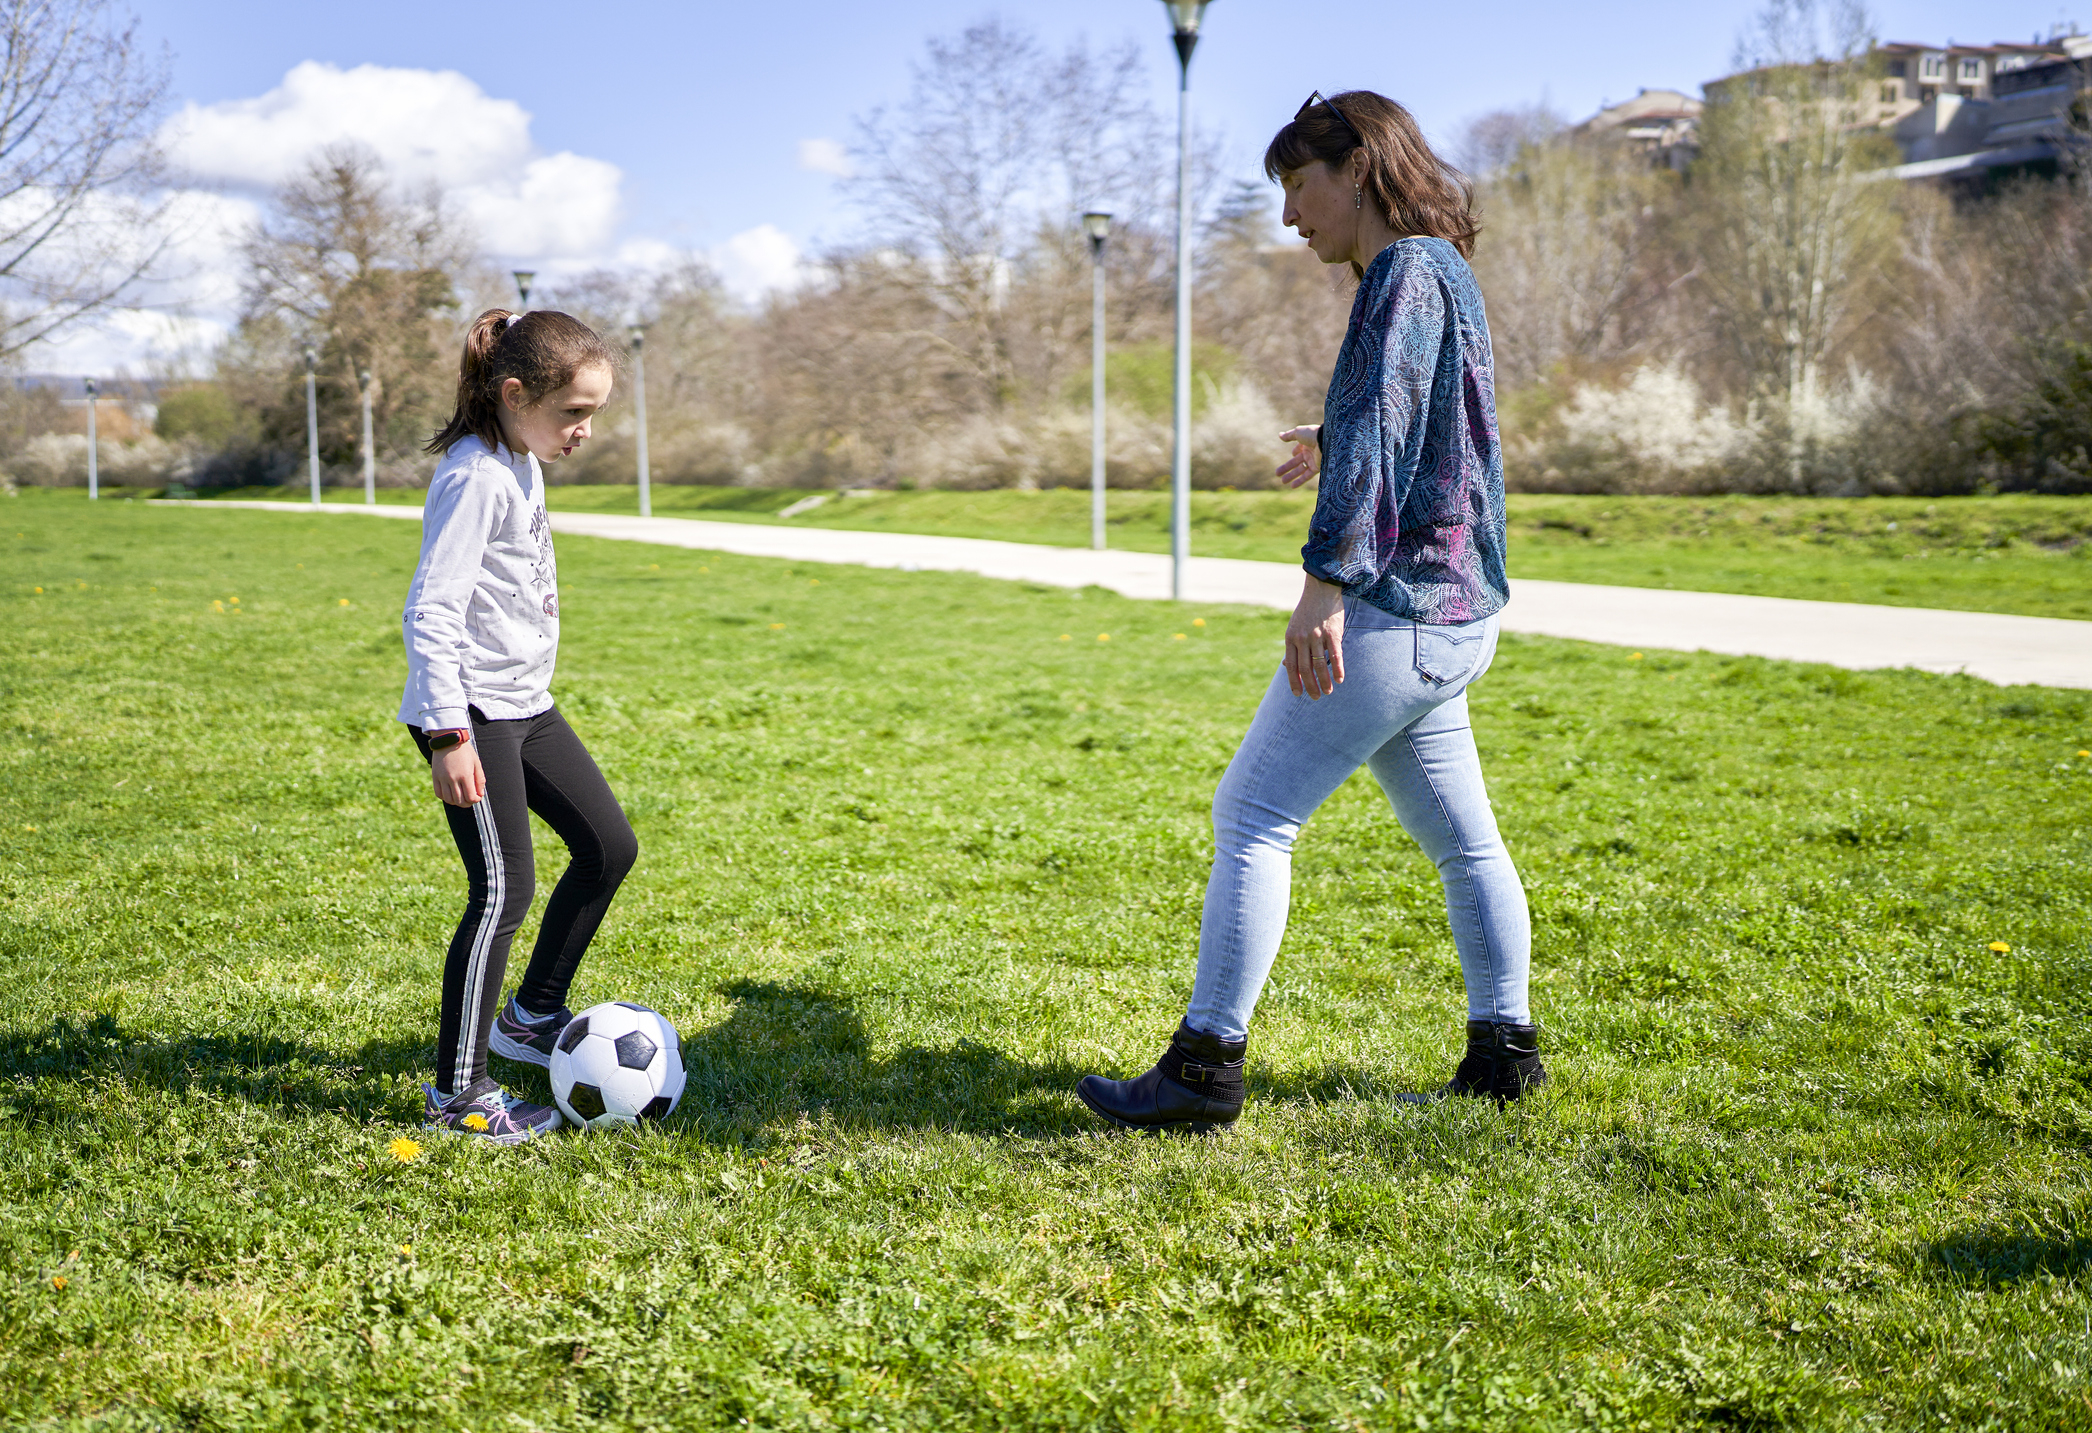 Mother and child playing soccer together in a park